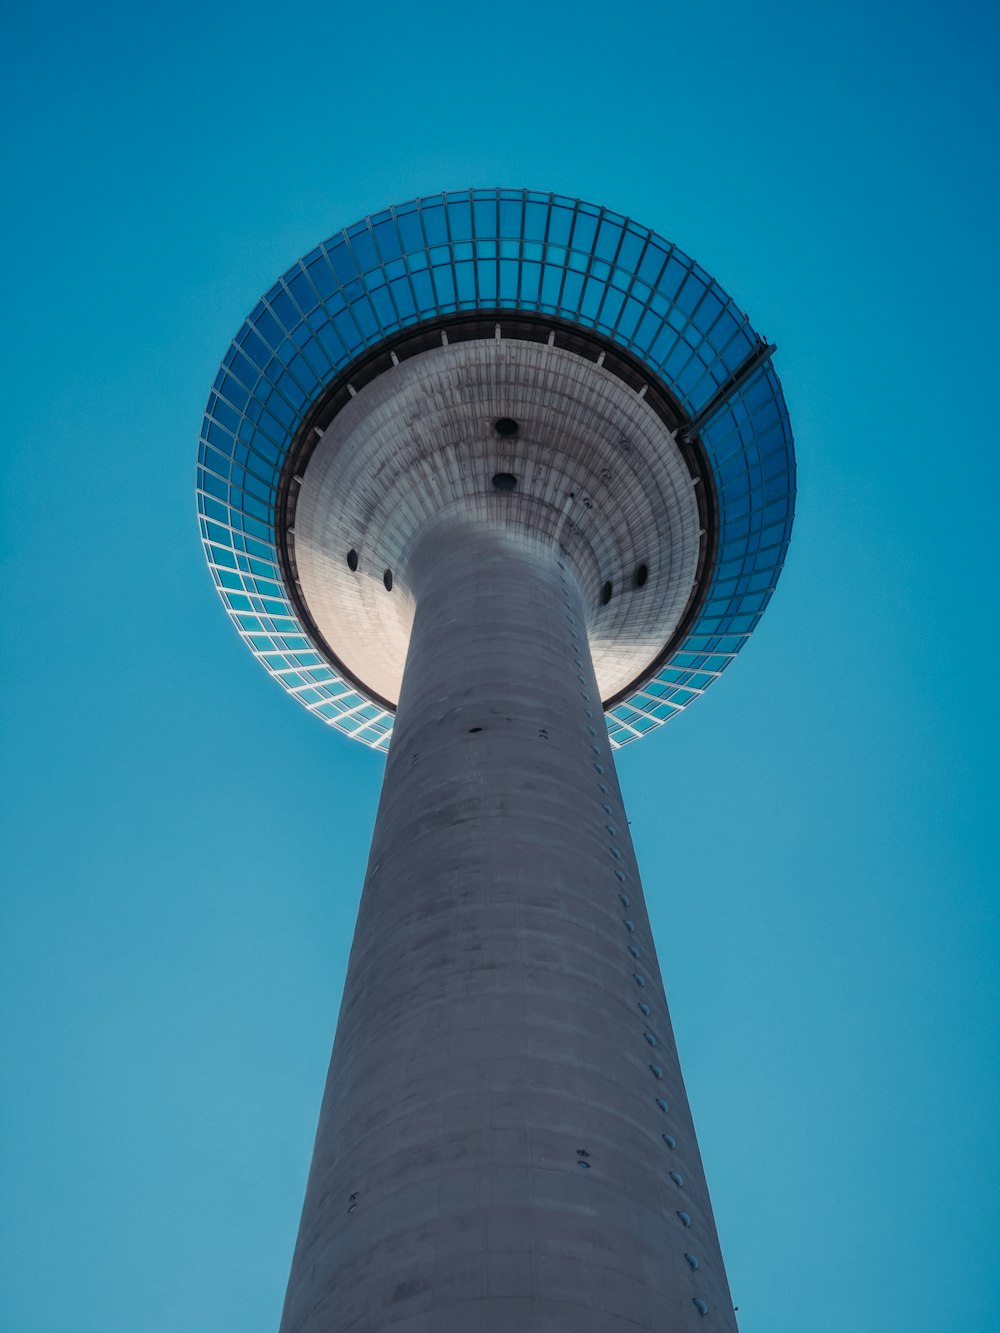 the top of a tall tower with a blue sky in the background